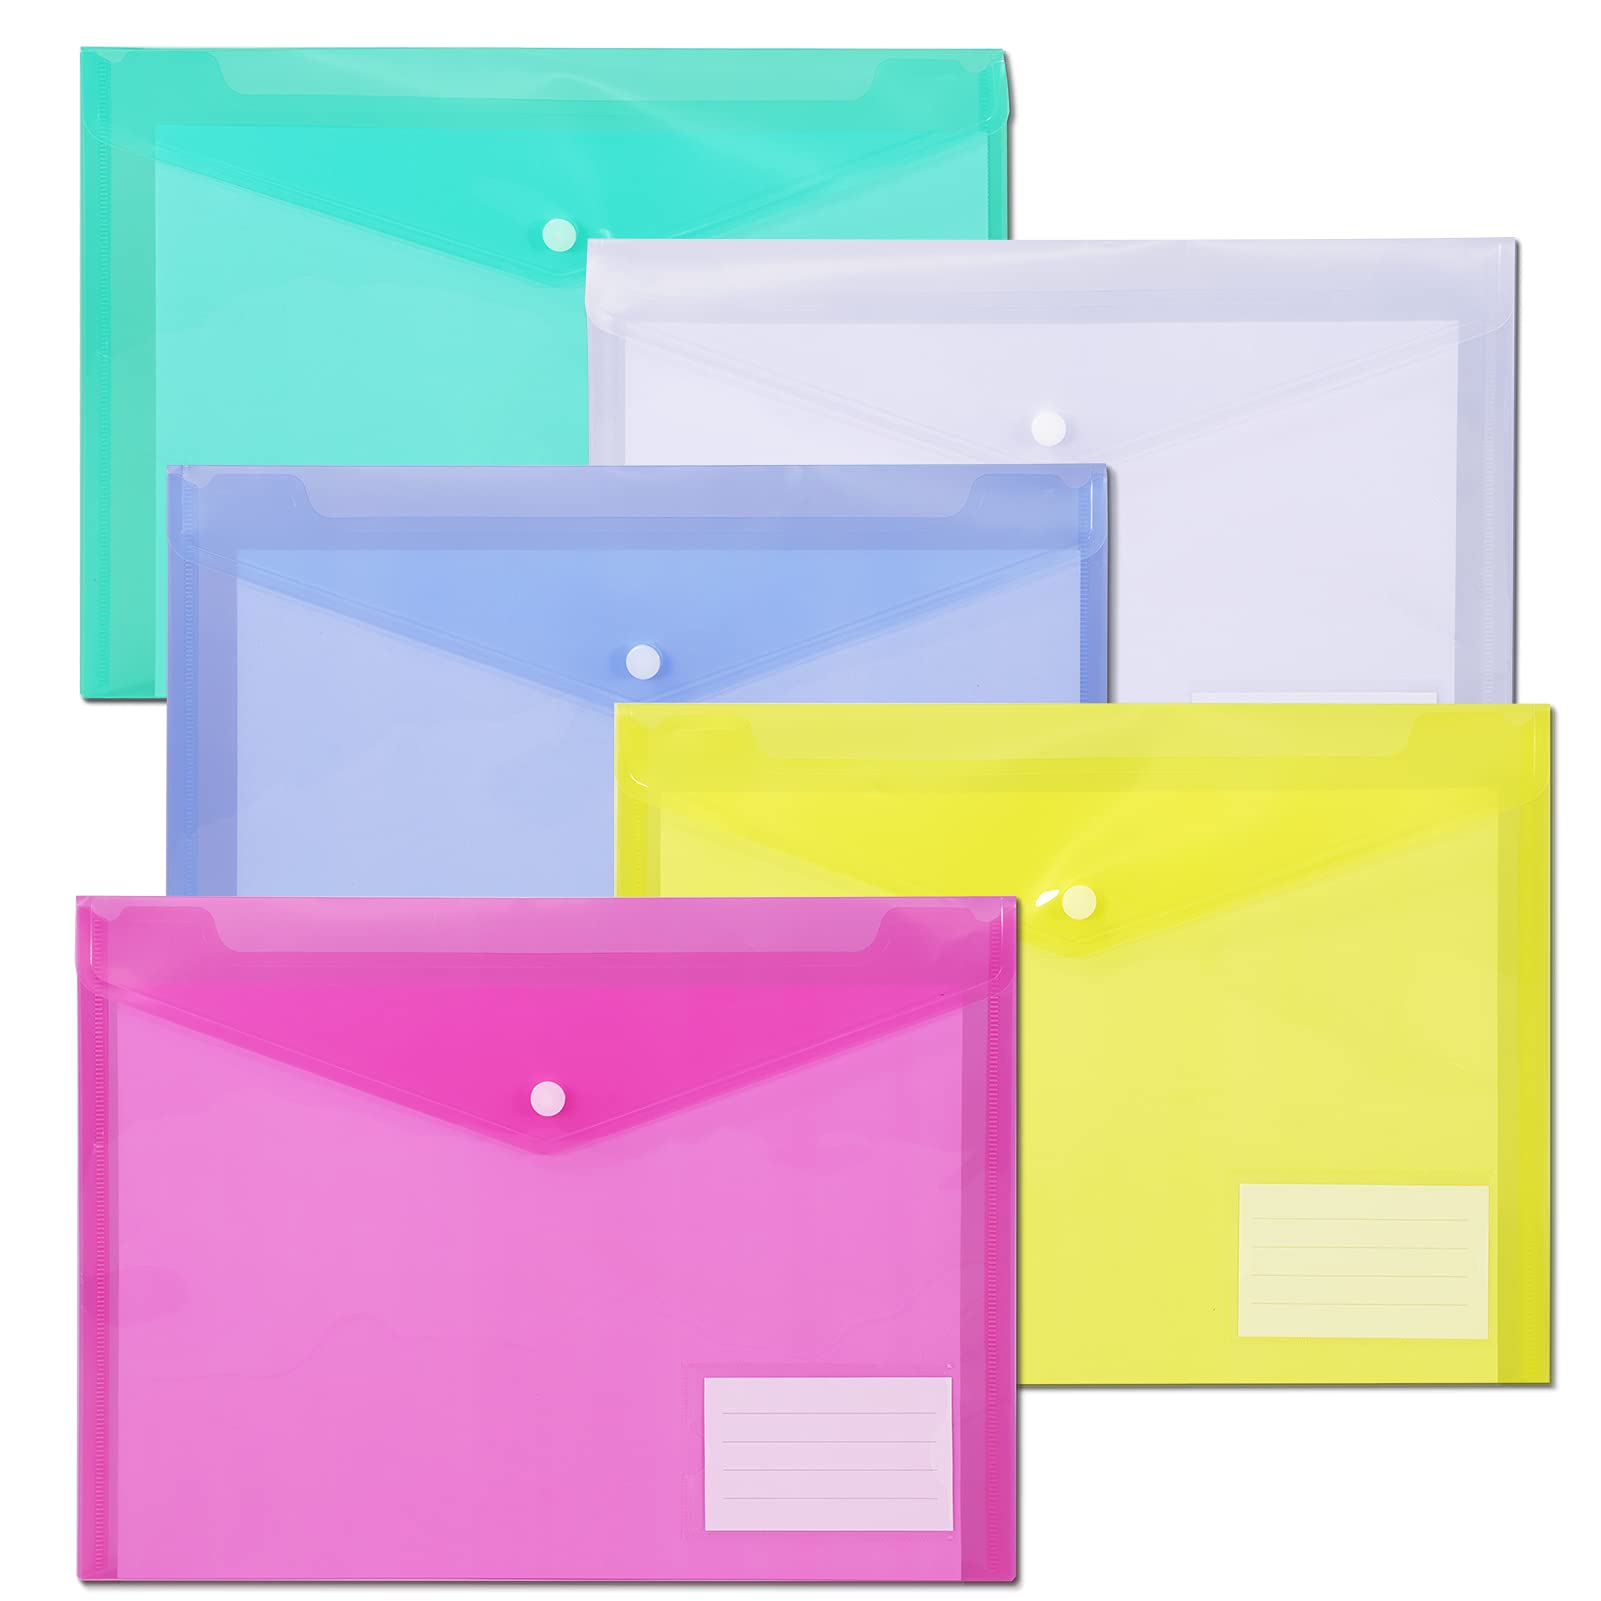 Mua File Folders,Plastic Envelope Folder With Snap Closure,Us Letter A4  Size Poly Envelopes With Label Pocket,Folders For Documents,Assorted  Color,10 Pack… Trên Amazon Mỹ Chính Hãng 2023 | Giaonhan247